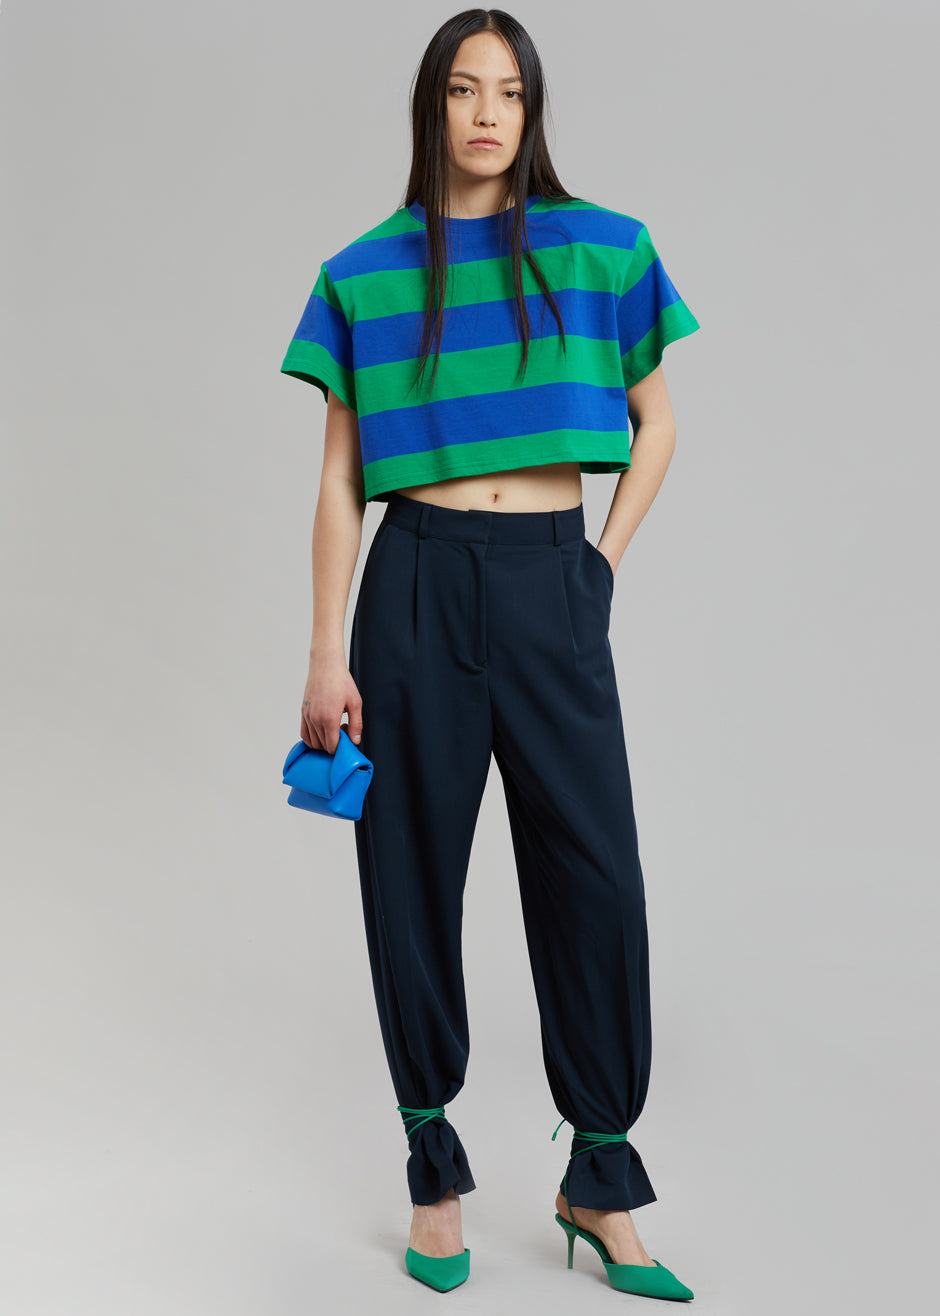 Caco Padded Cropped Tee - Navy/Green - 1